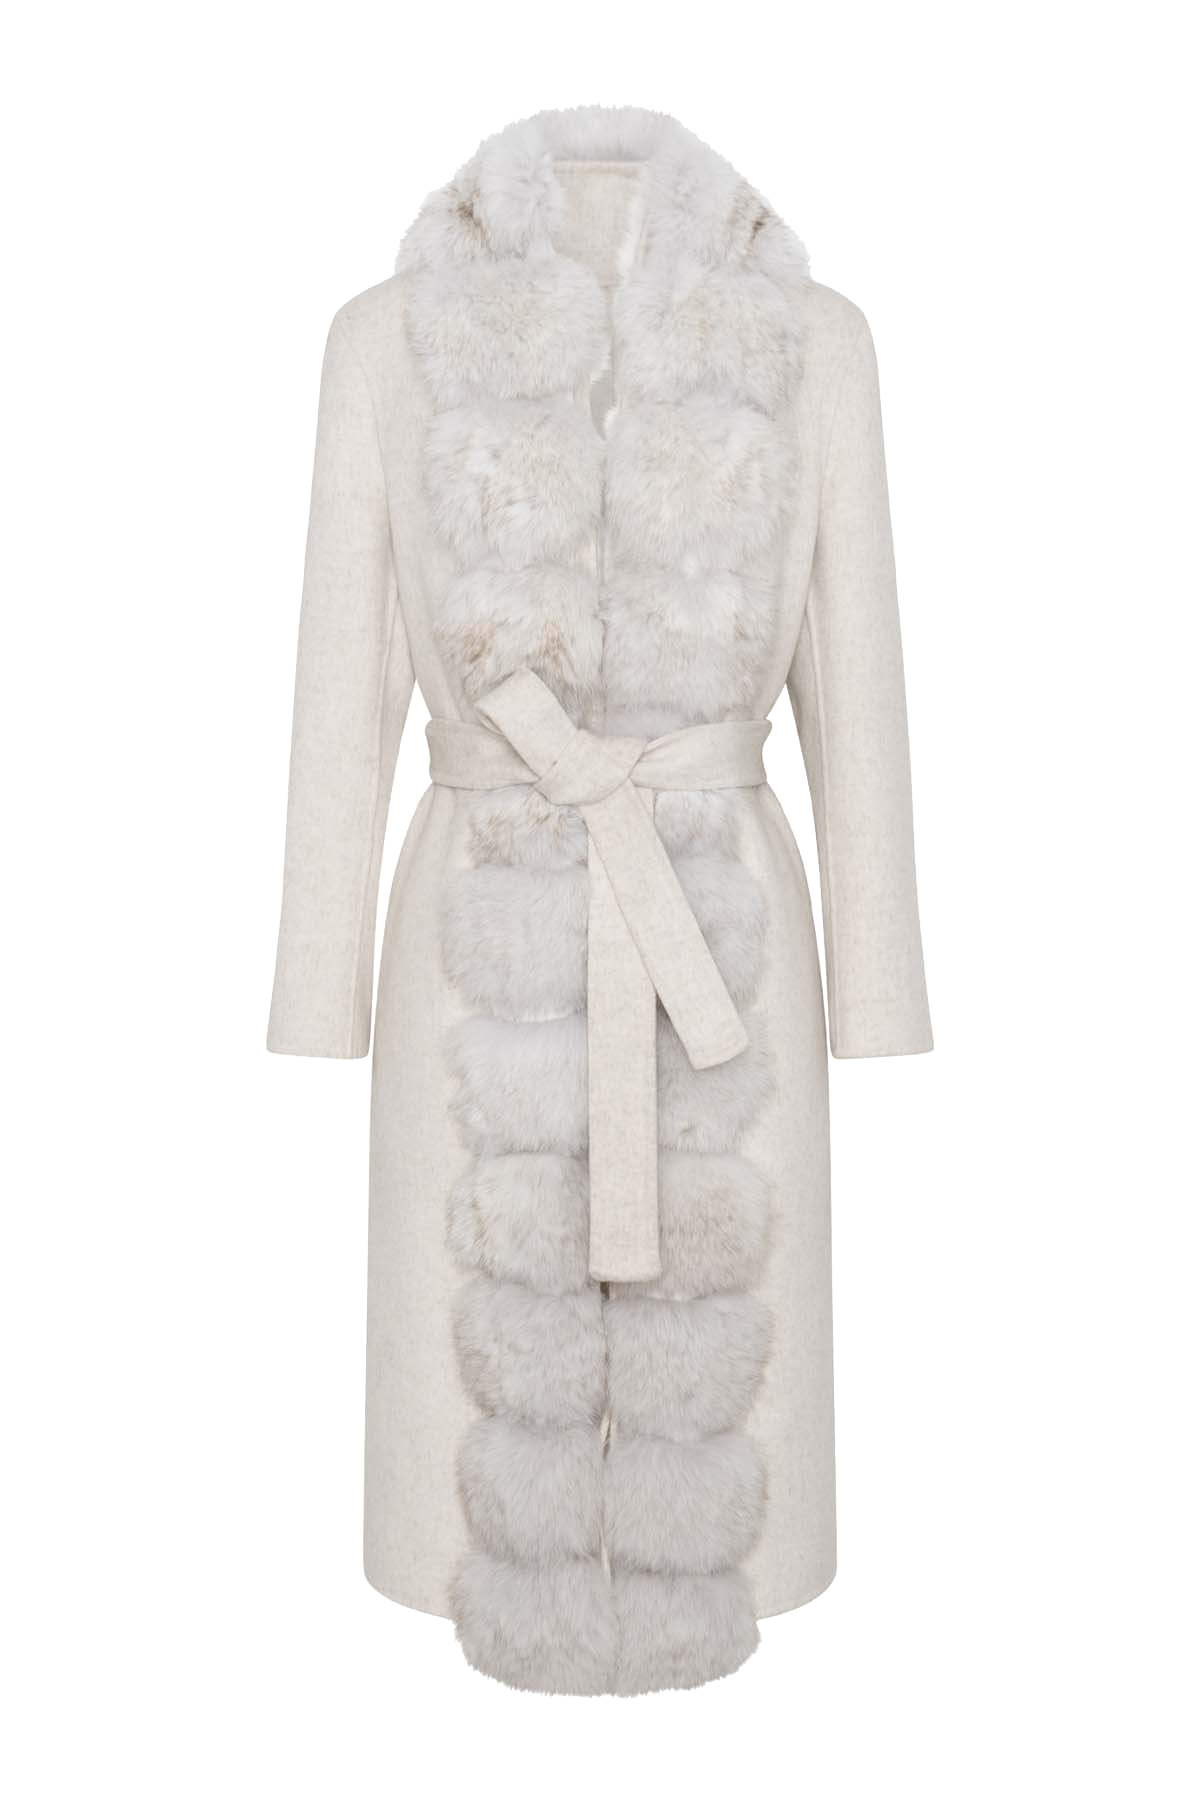 White Faux Fur Coat 1 - furoutlet - fur coat, fur jackets, fur hats, prices  subject to change without notice, so order now!